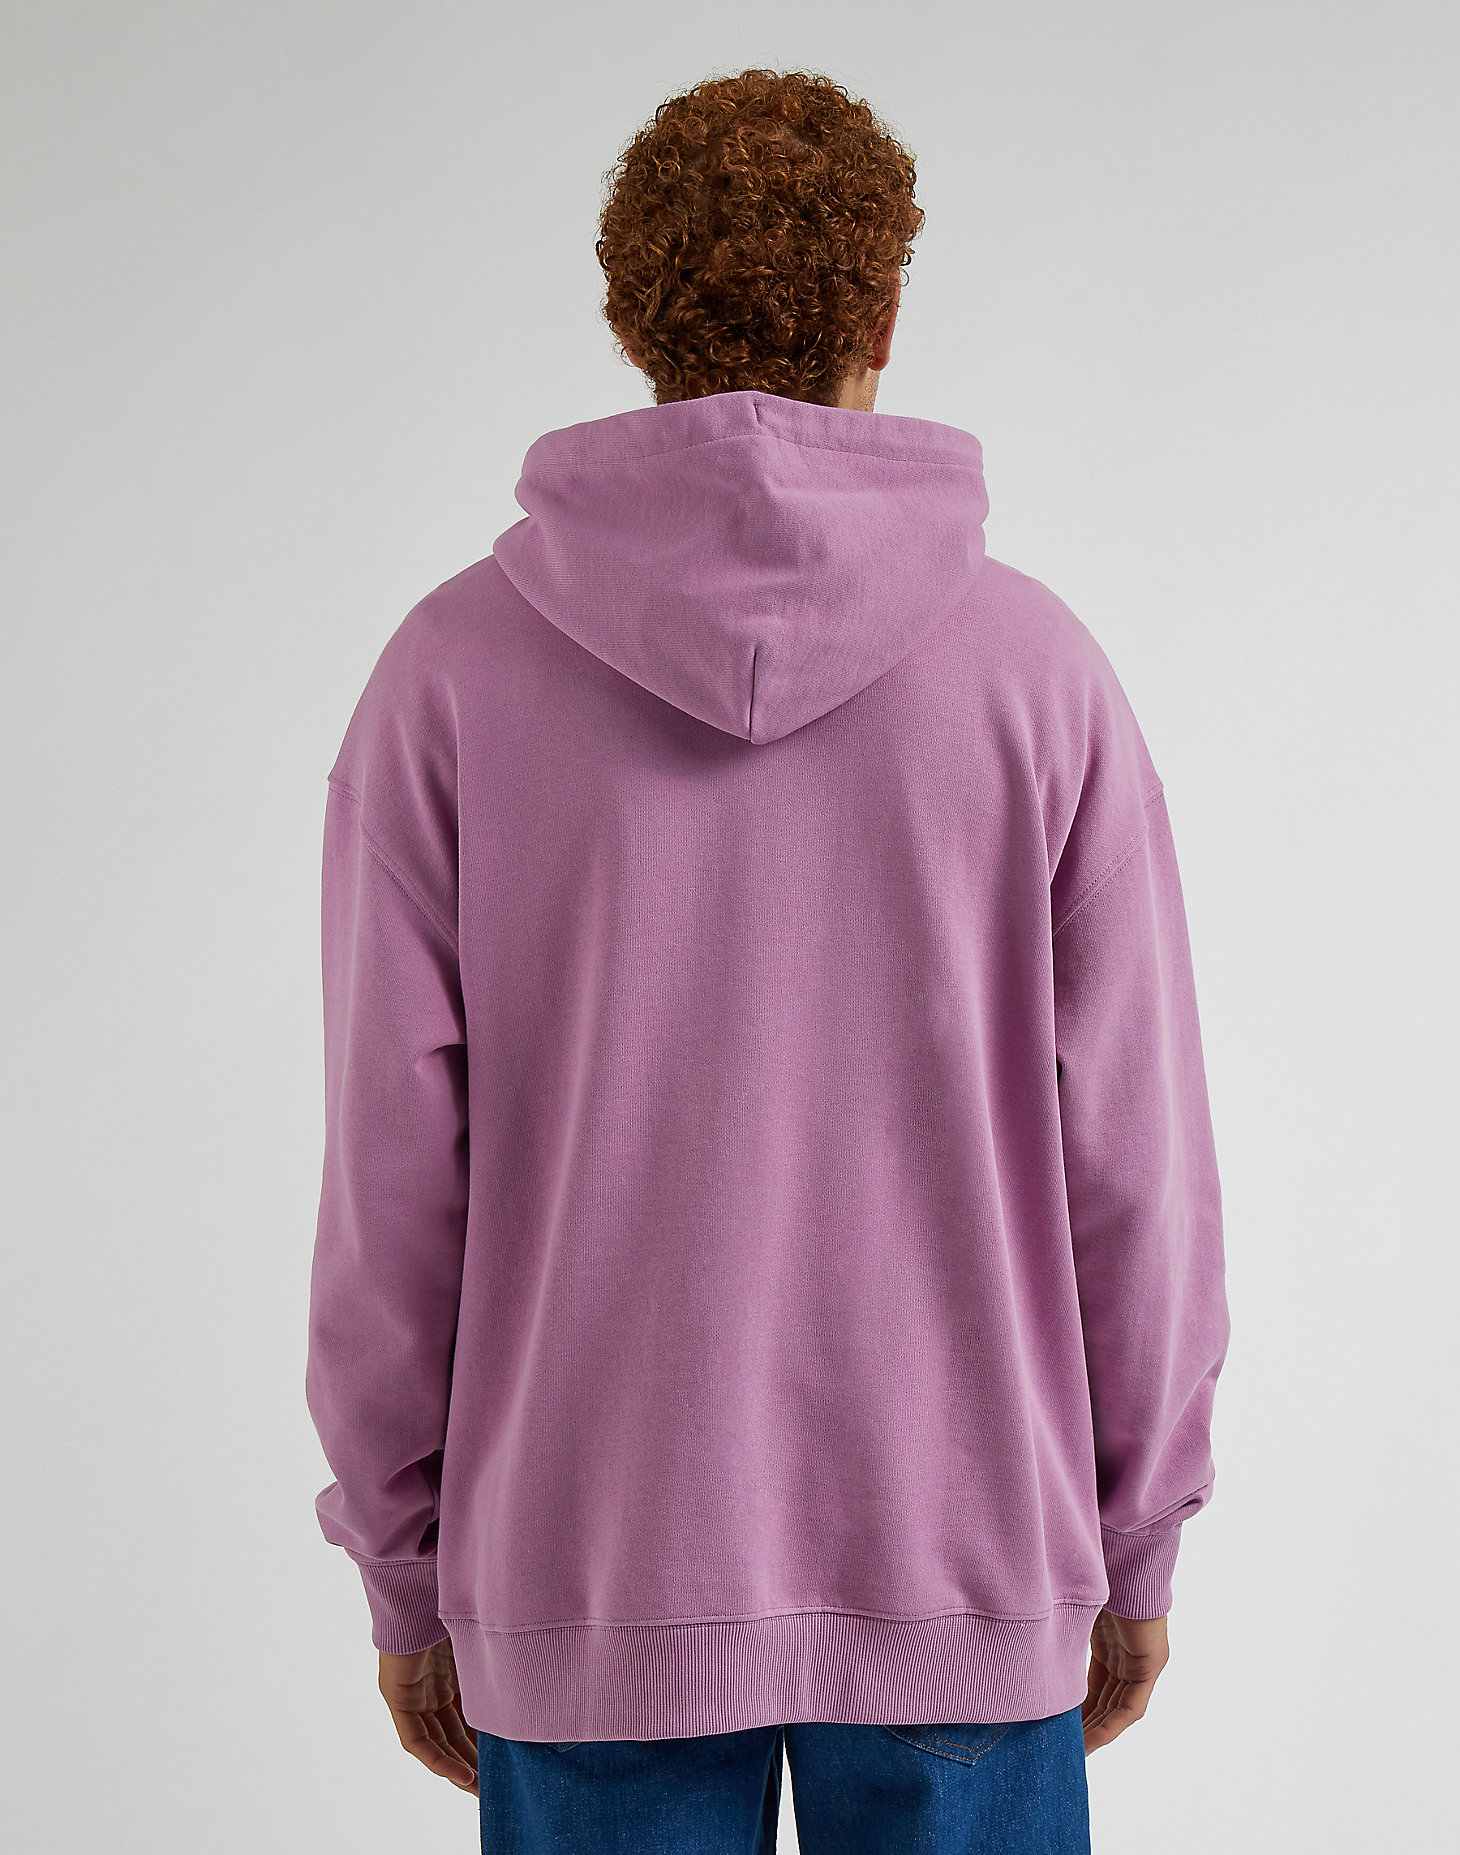 Core Loose Hoodie in Pansy alternative view 1